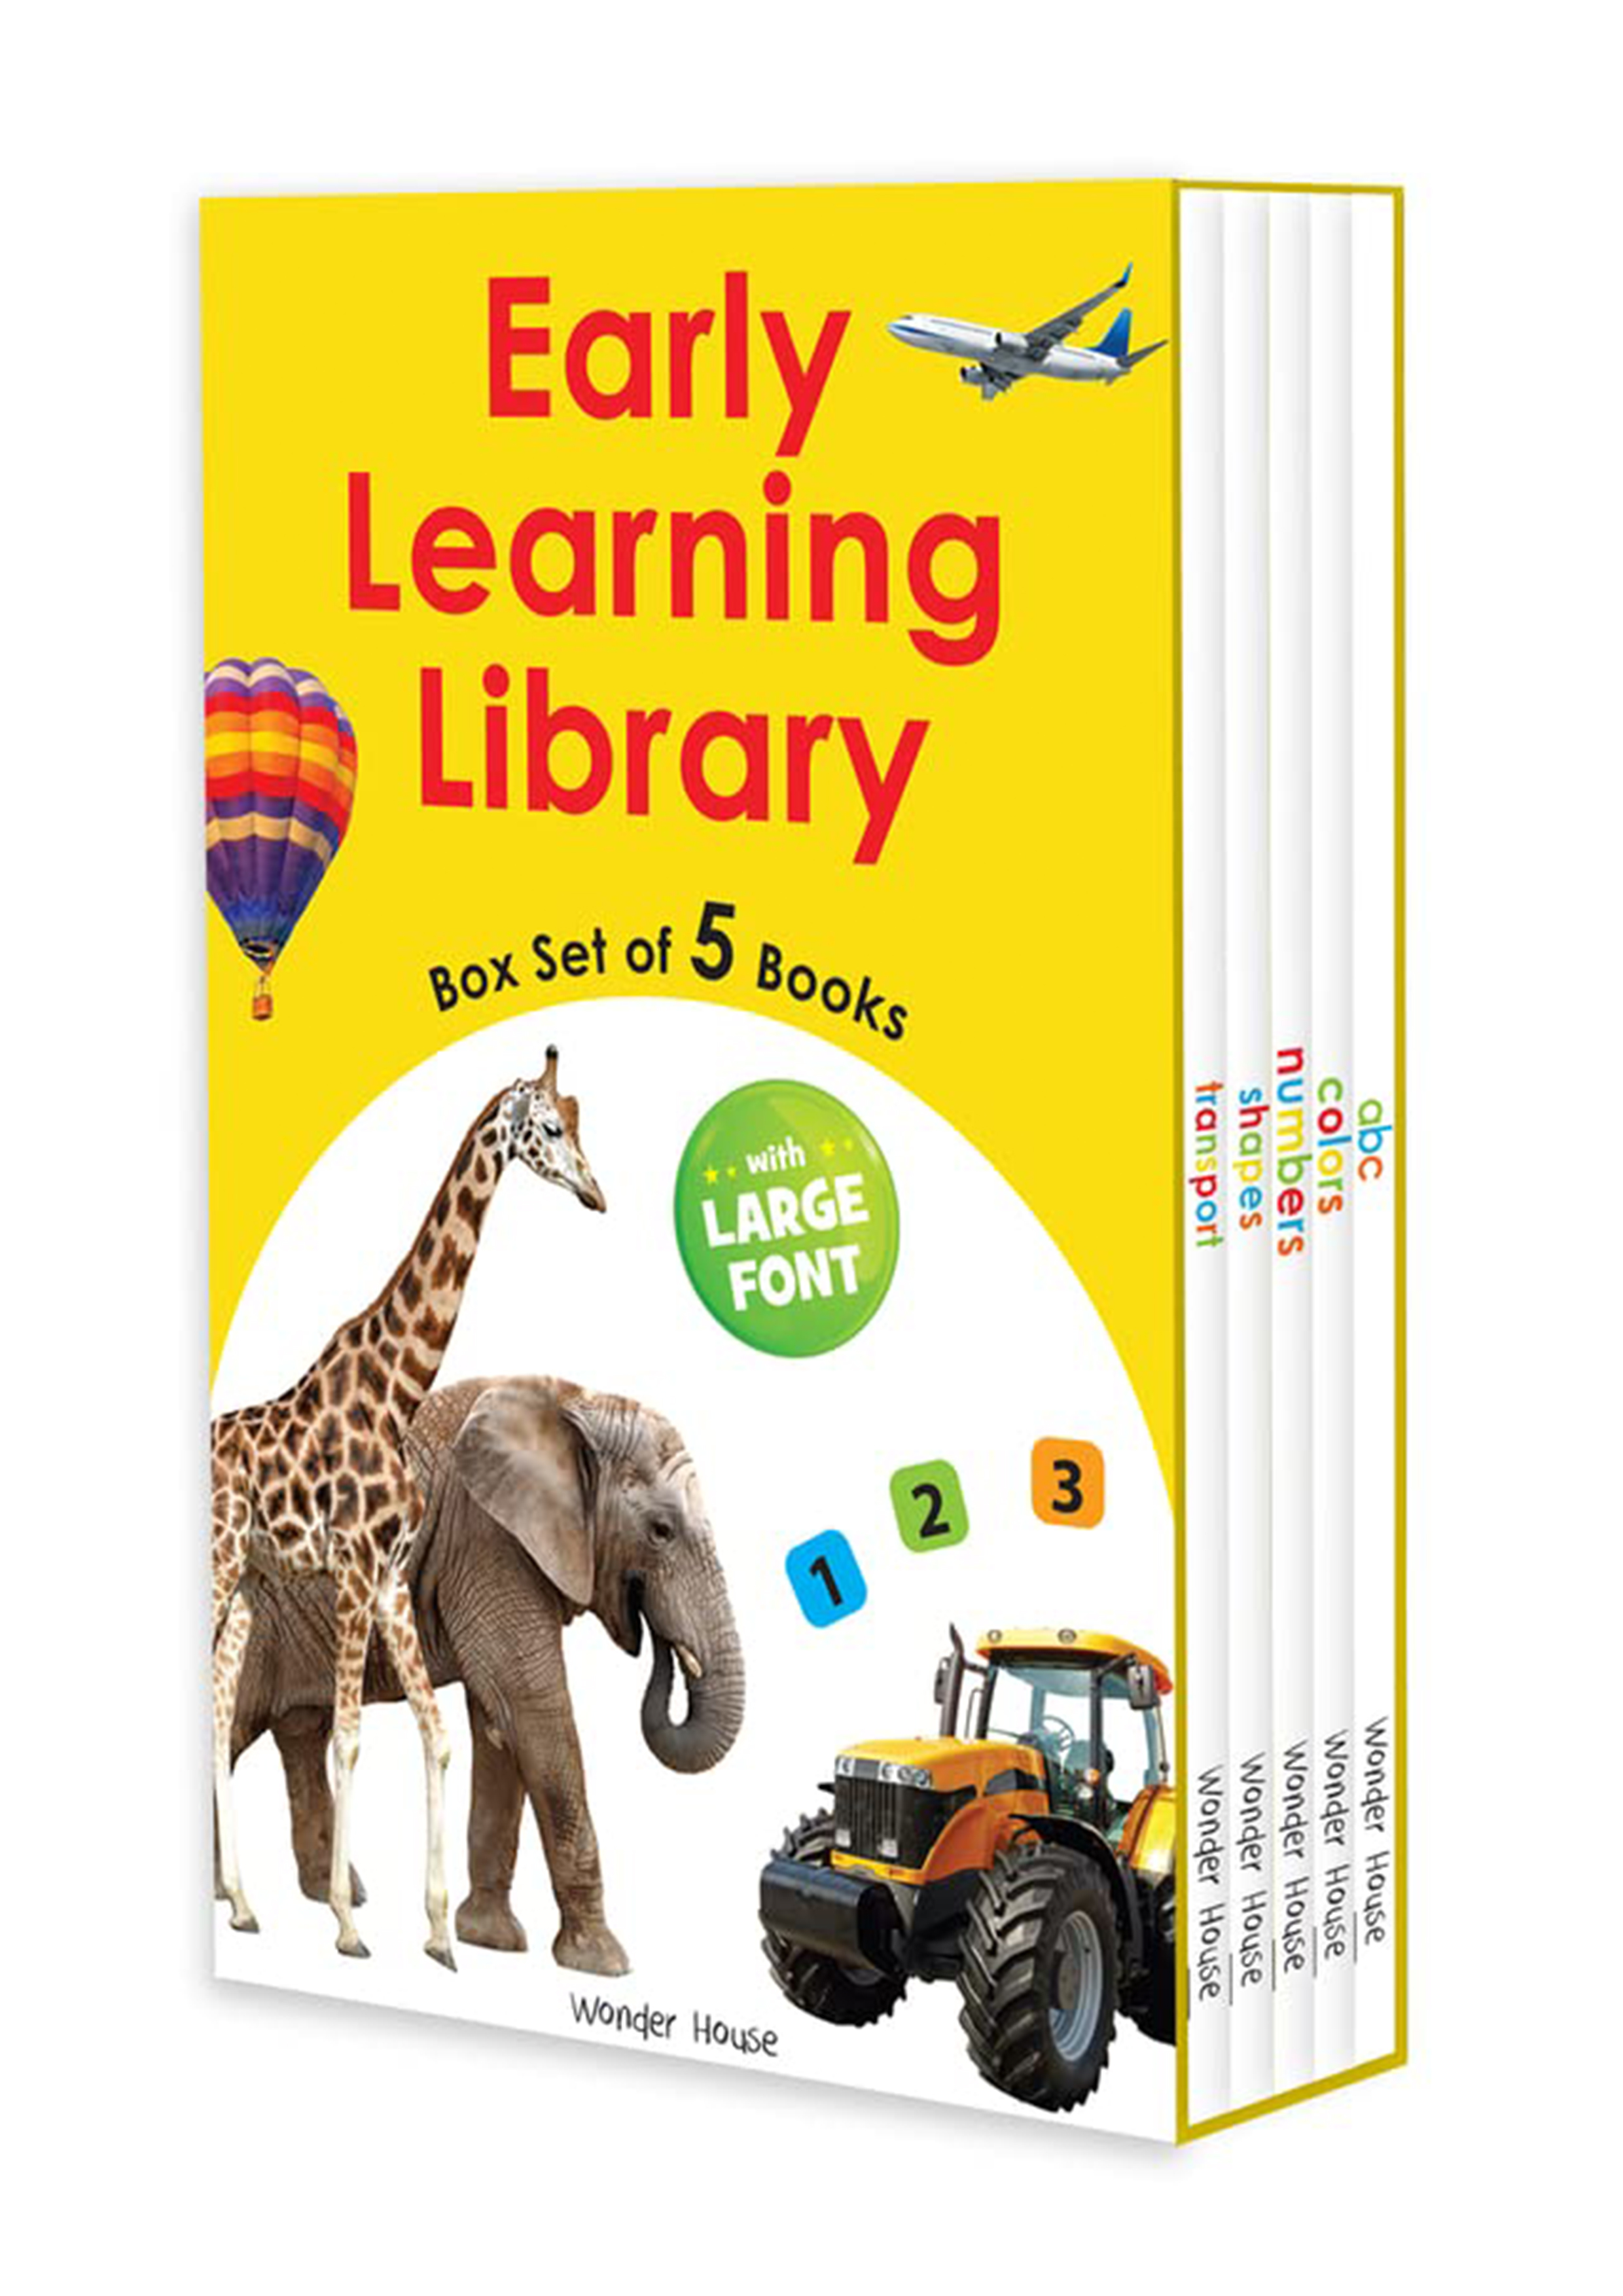 Early Learning Library Box Set of 5 Books (পেপারব্যাক)